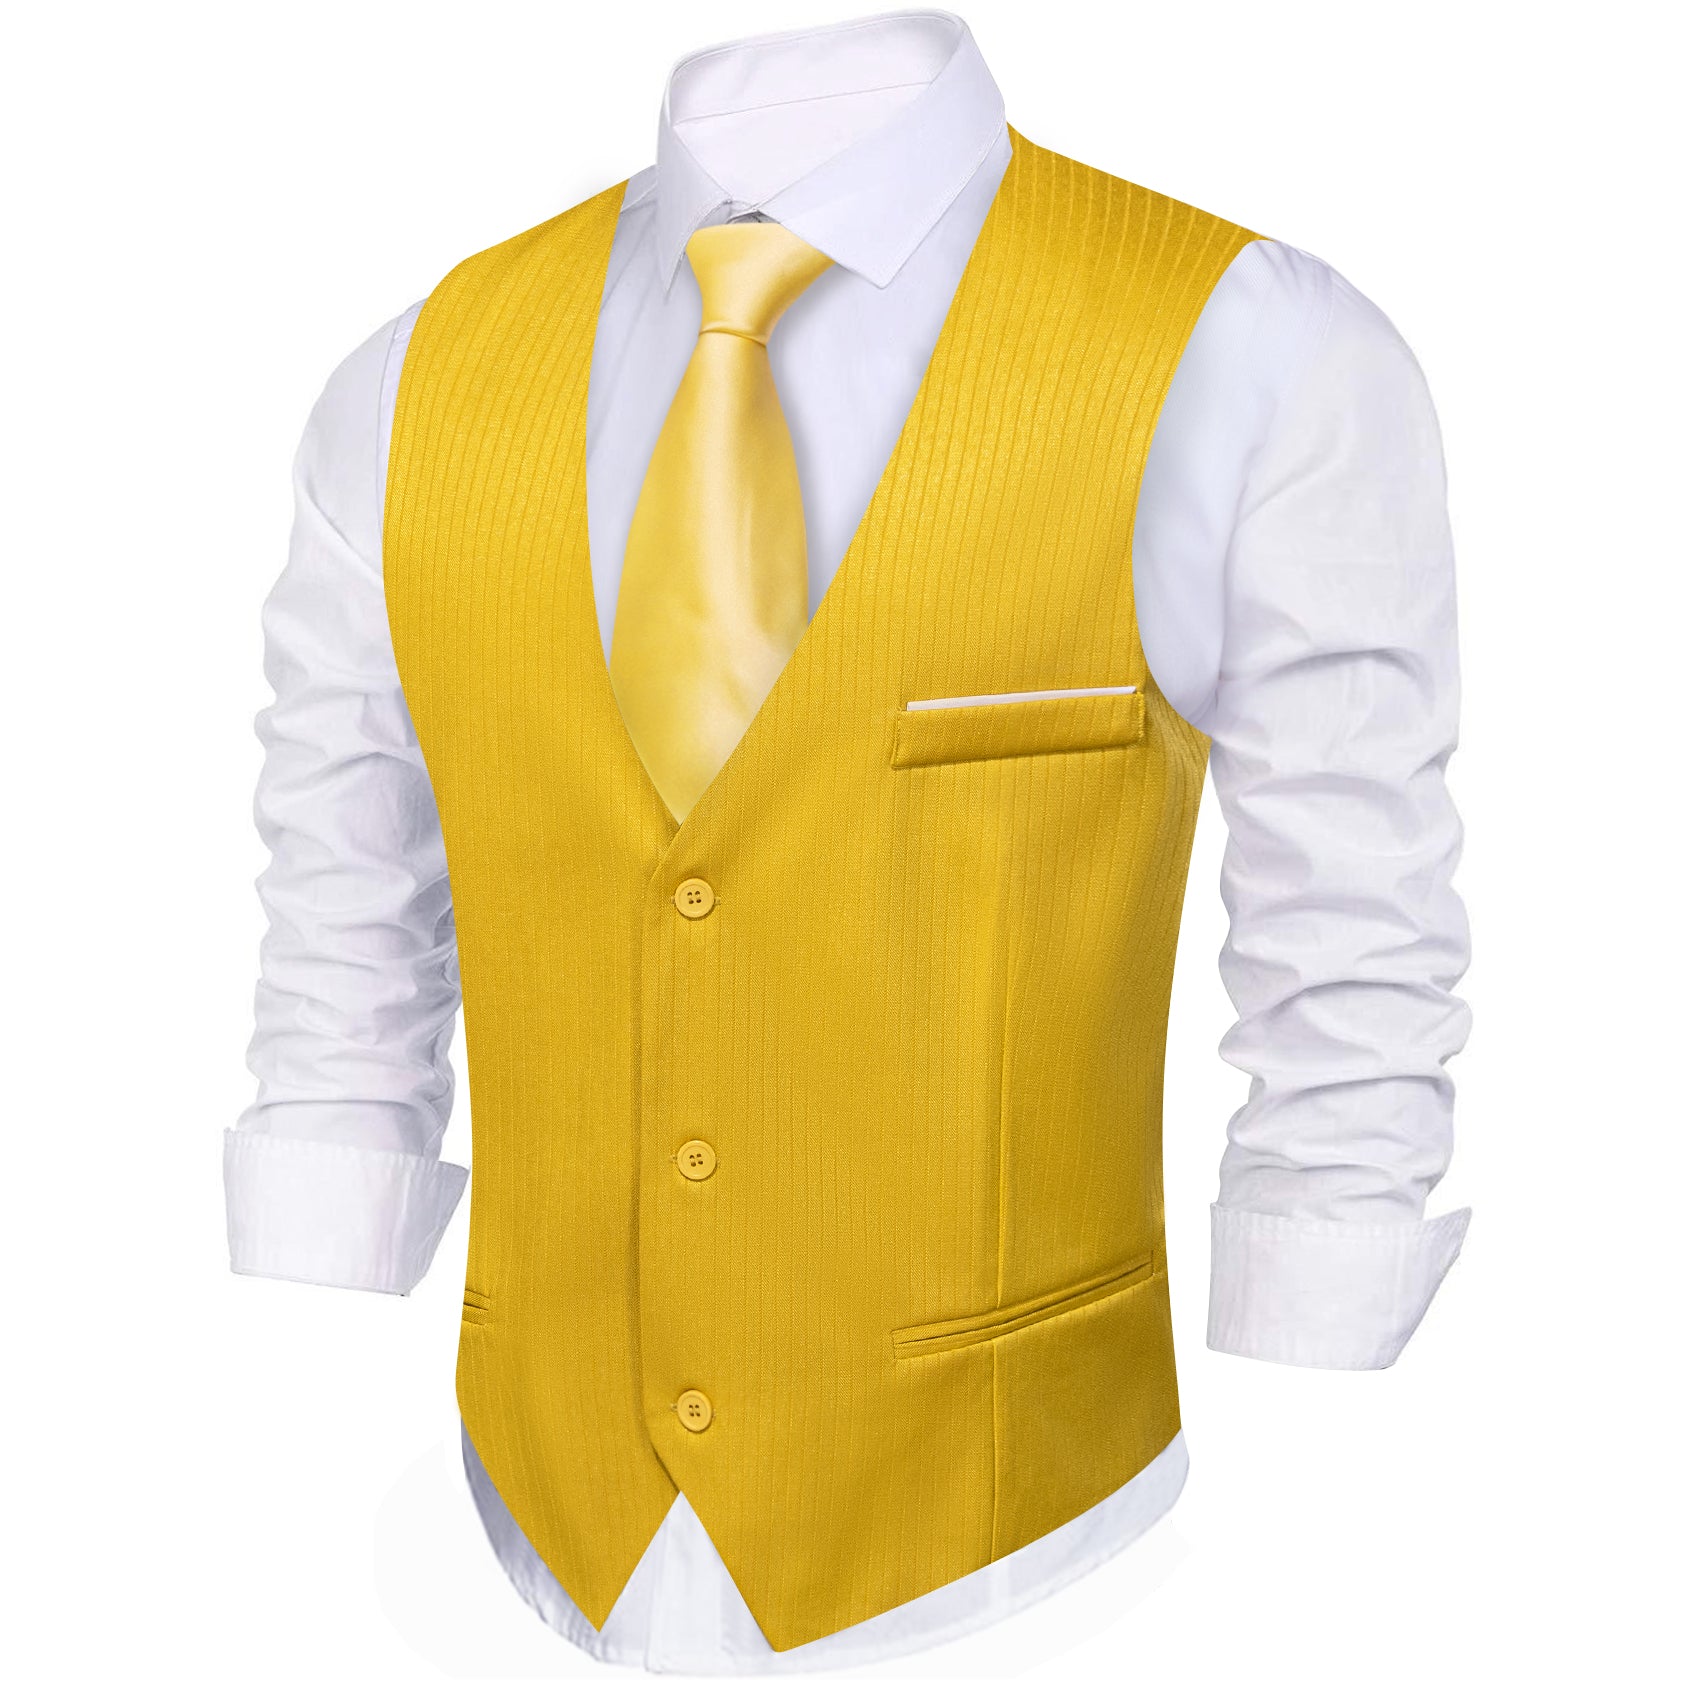 Barry.wang Yellow Solid Business Vest Suit